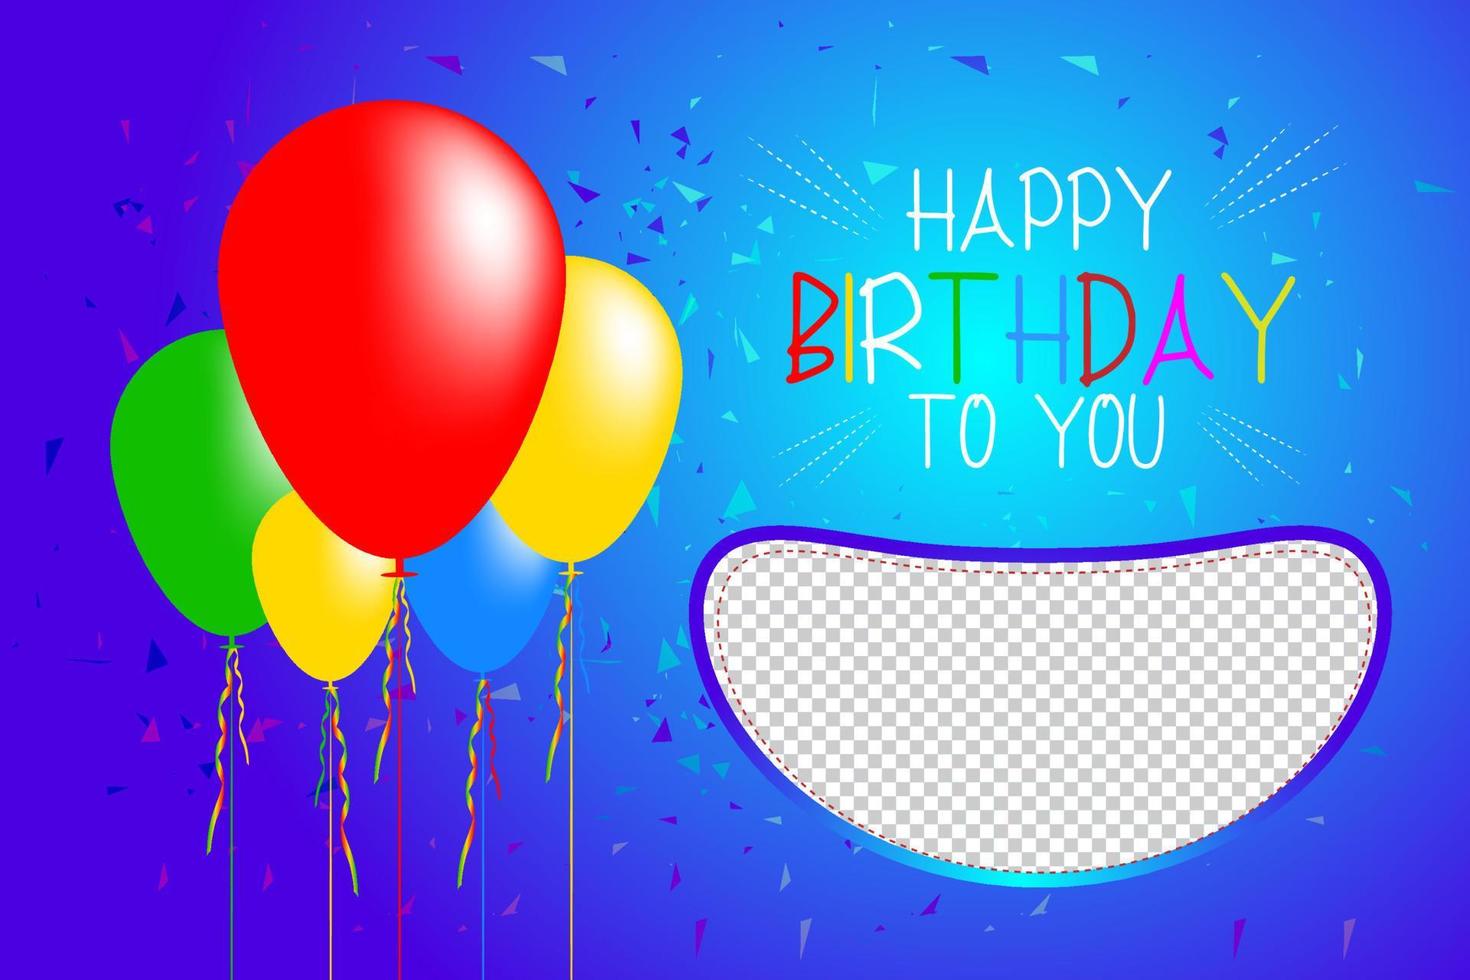 blue color Happy birthday celebration background with realistic balloons and photo frame design vector